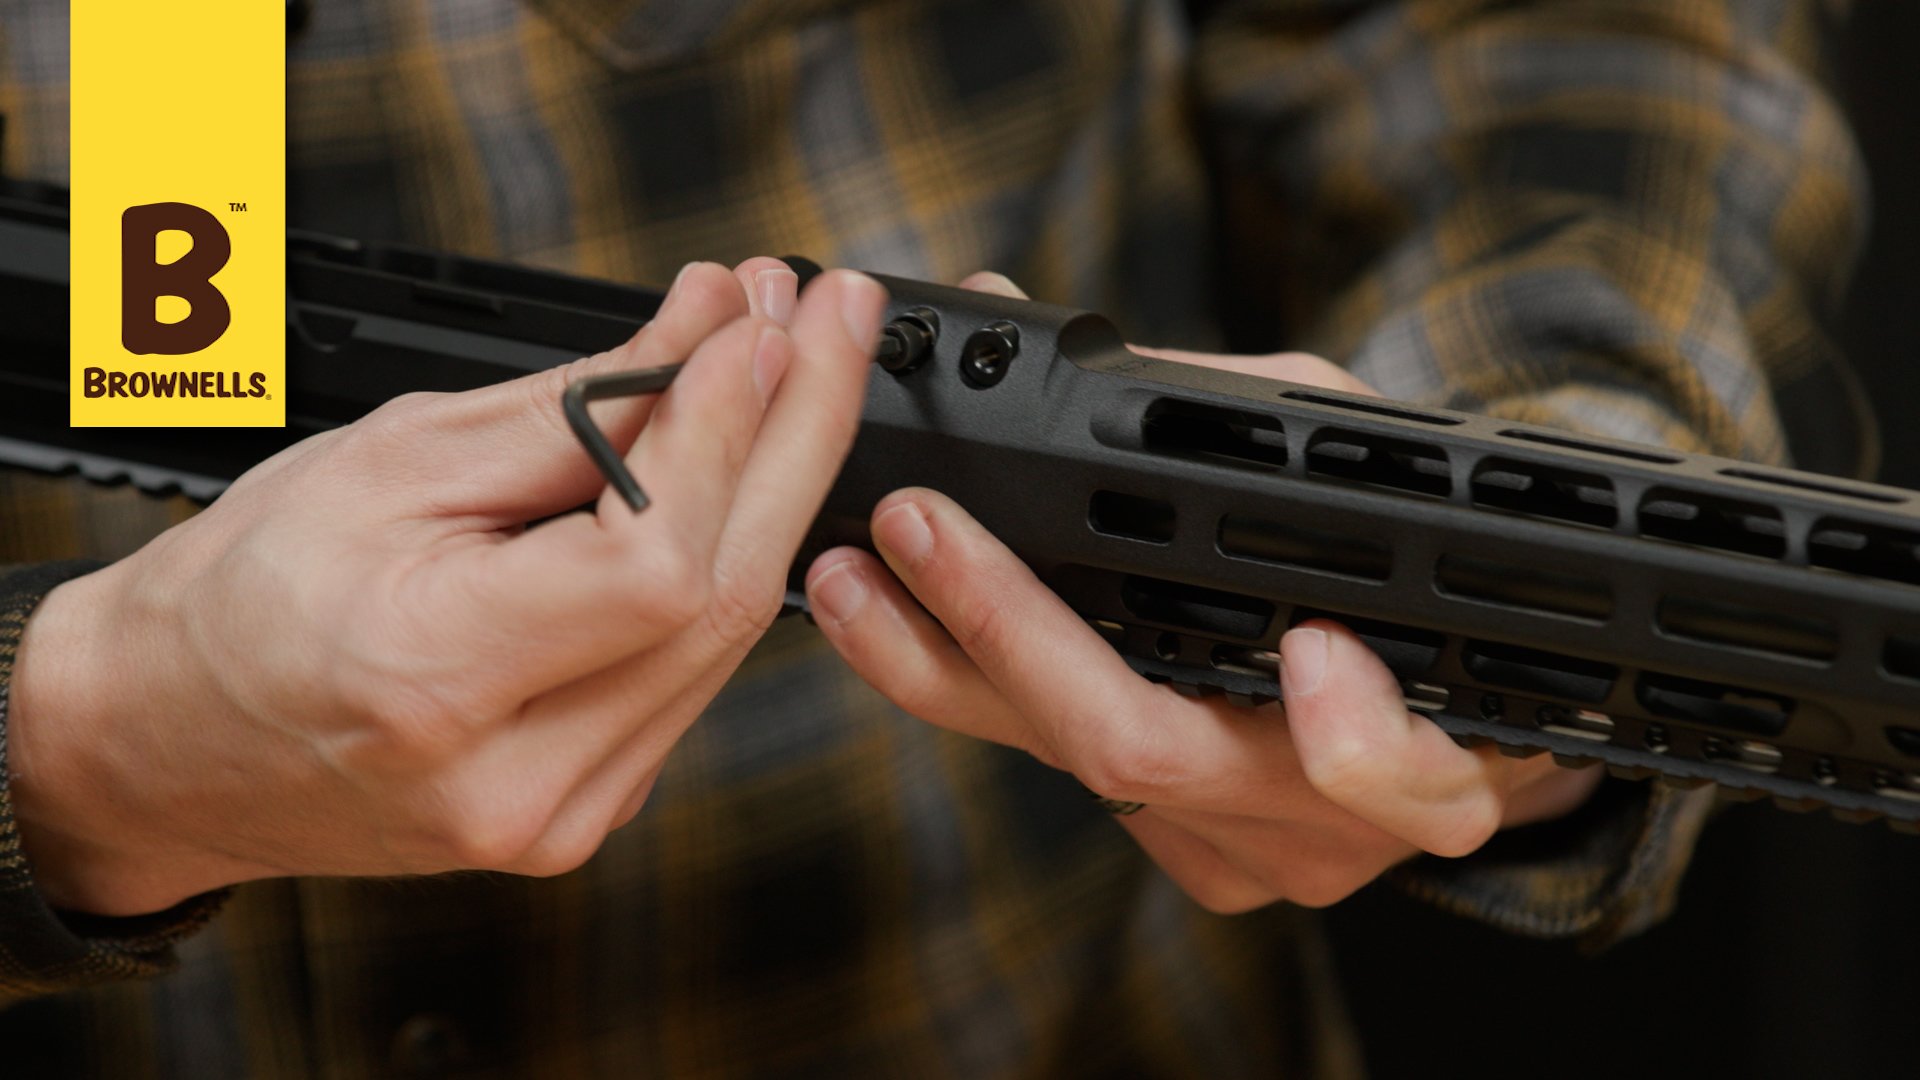 How To Install the SOLGW M89 Handguard